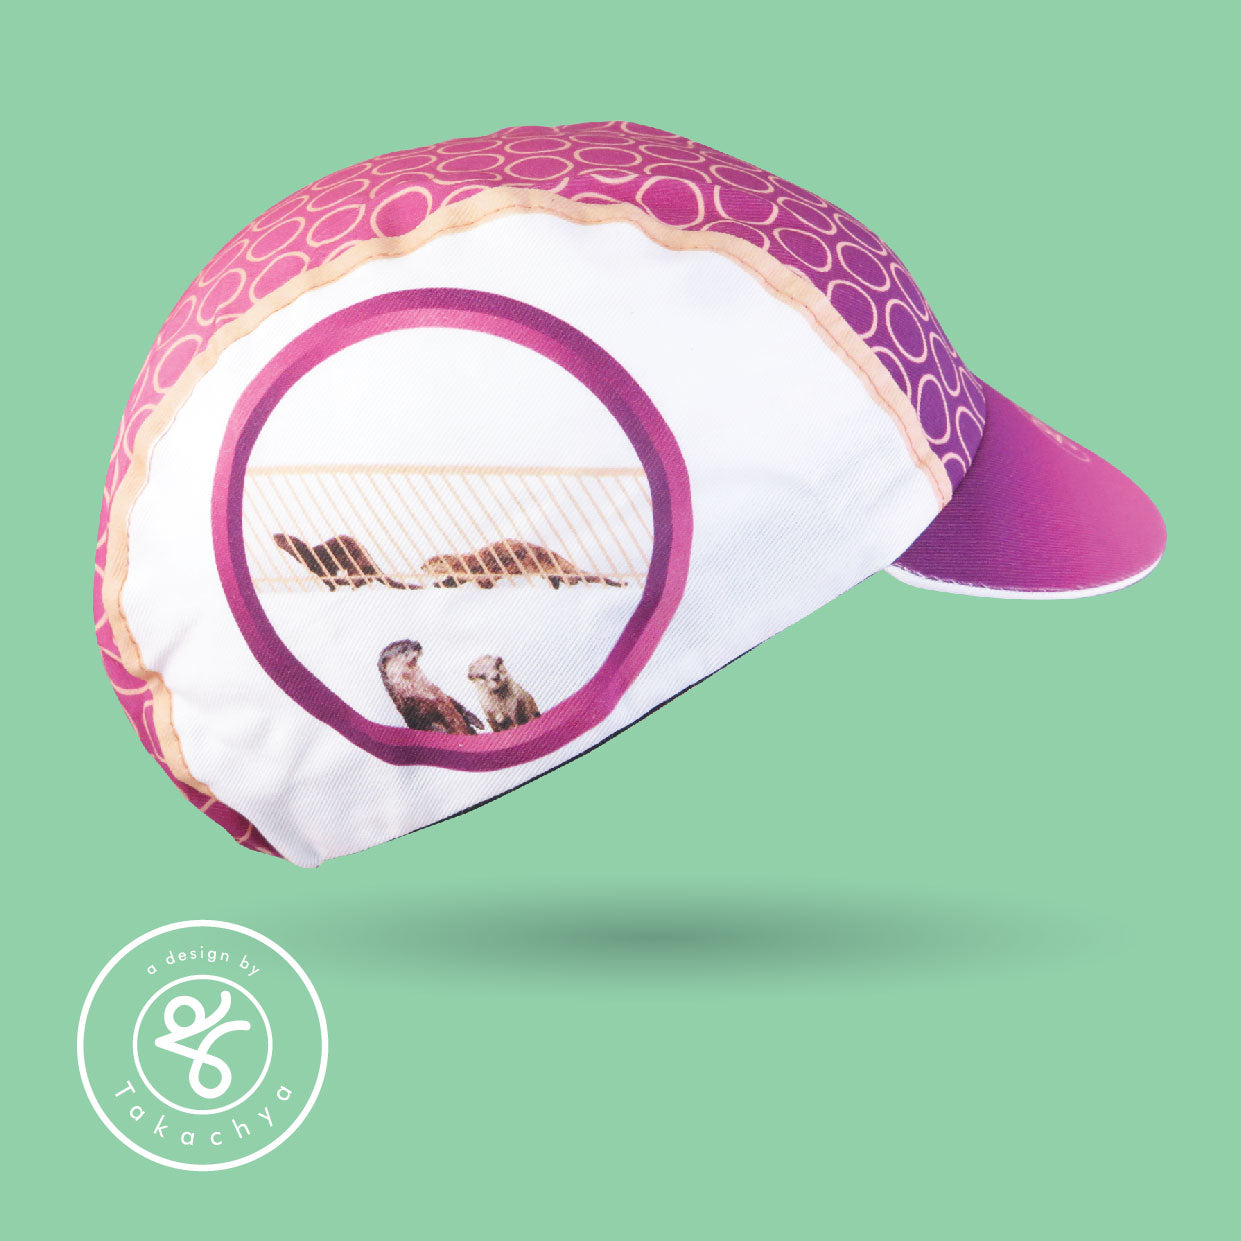 Voideck Otter - A Design by Takachya Cycling Cap